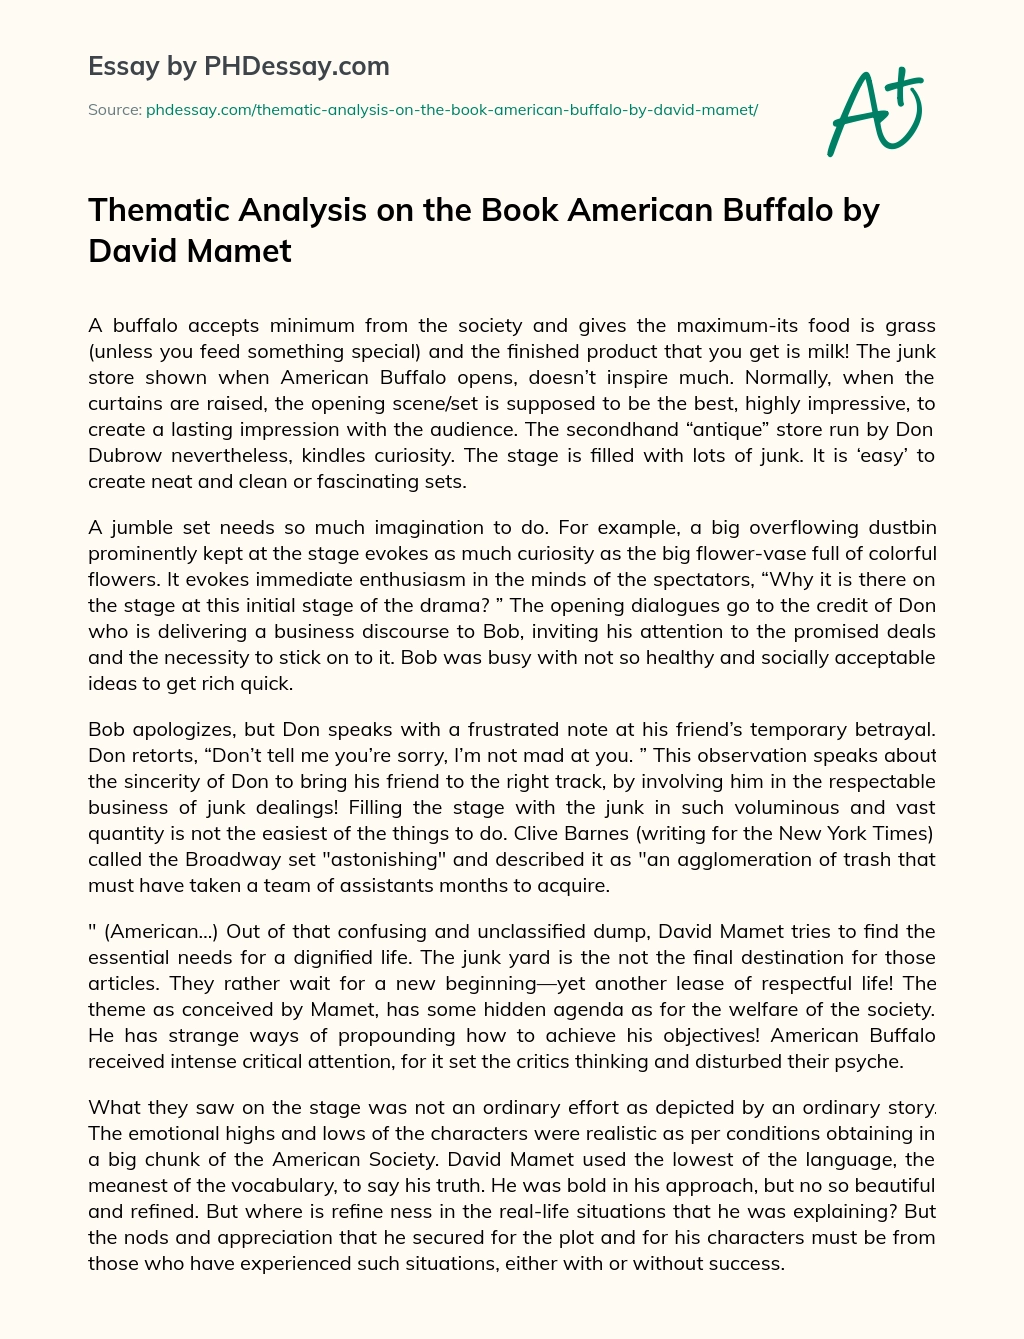 Thematic Analysis on the Book American Buffalo by David Mamet essay